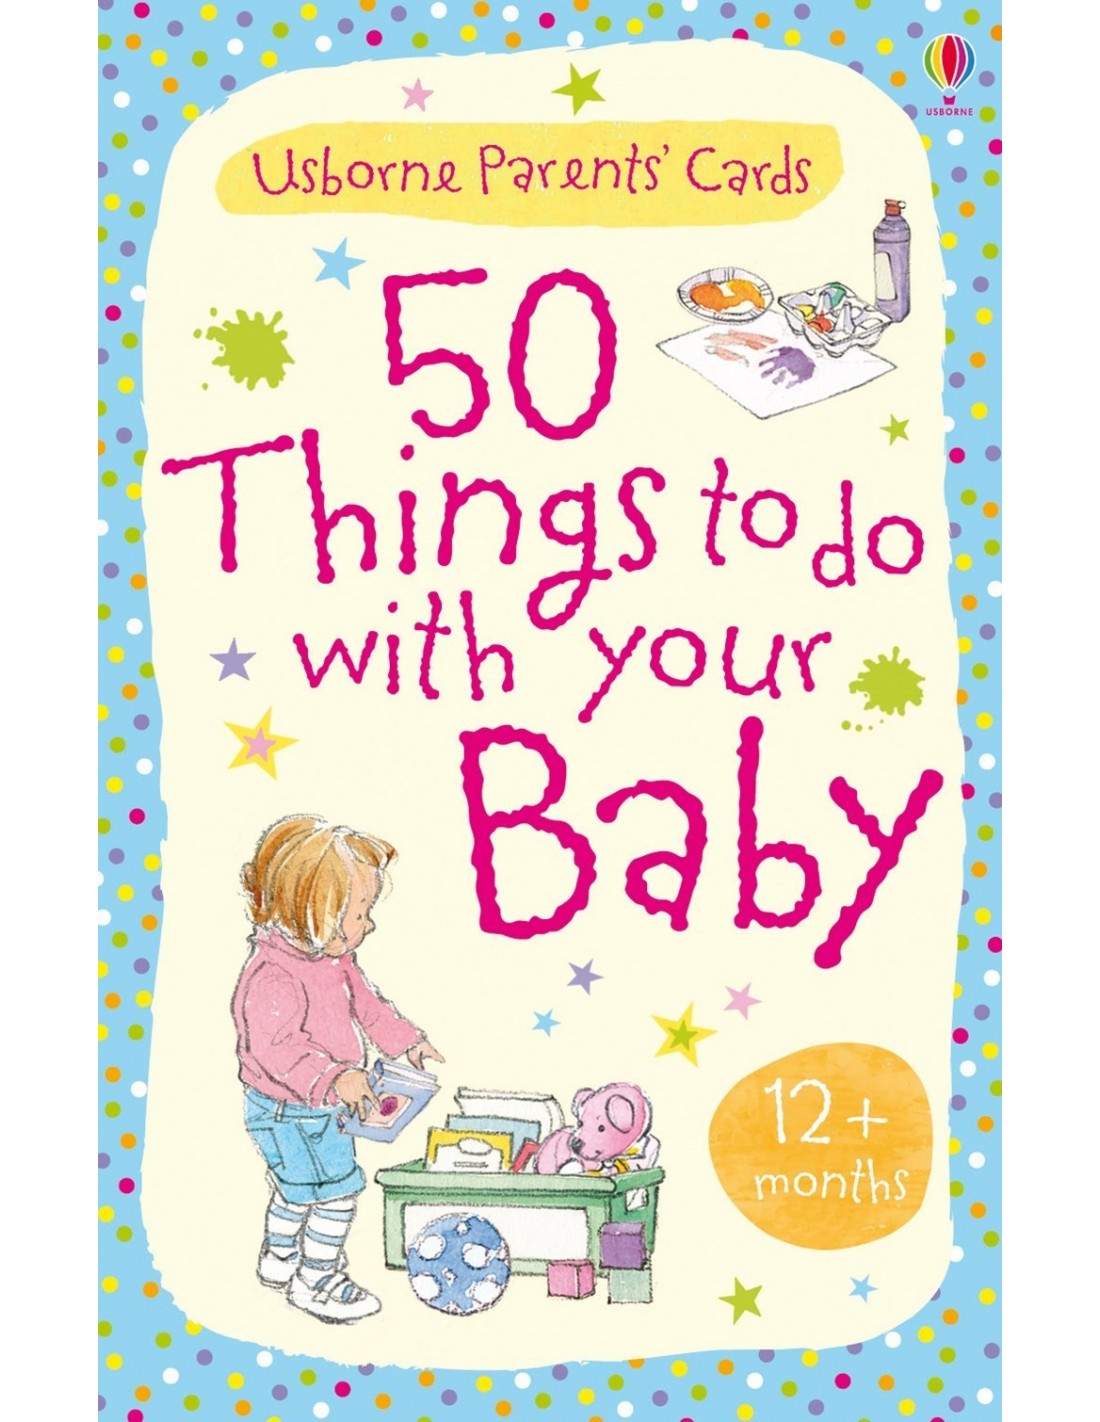 50 things to do with your baby: 12+ months